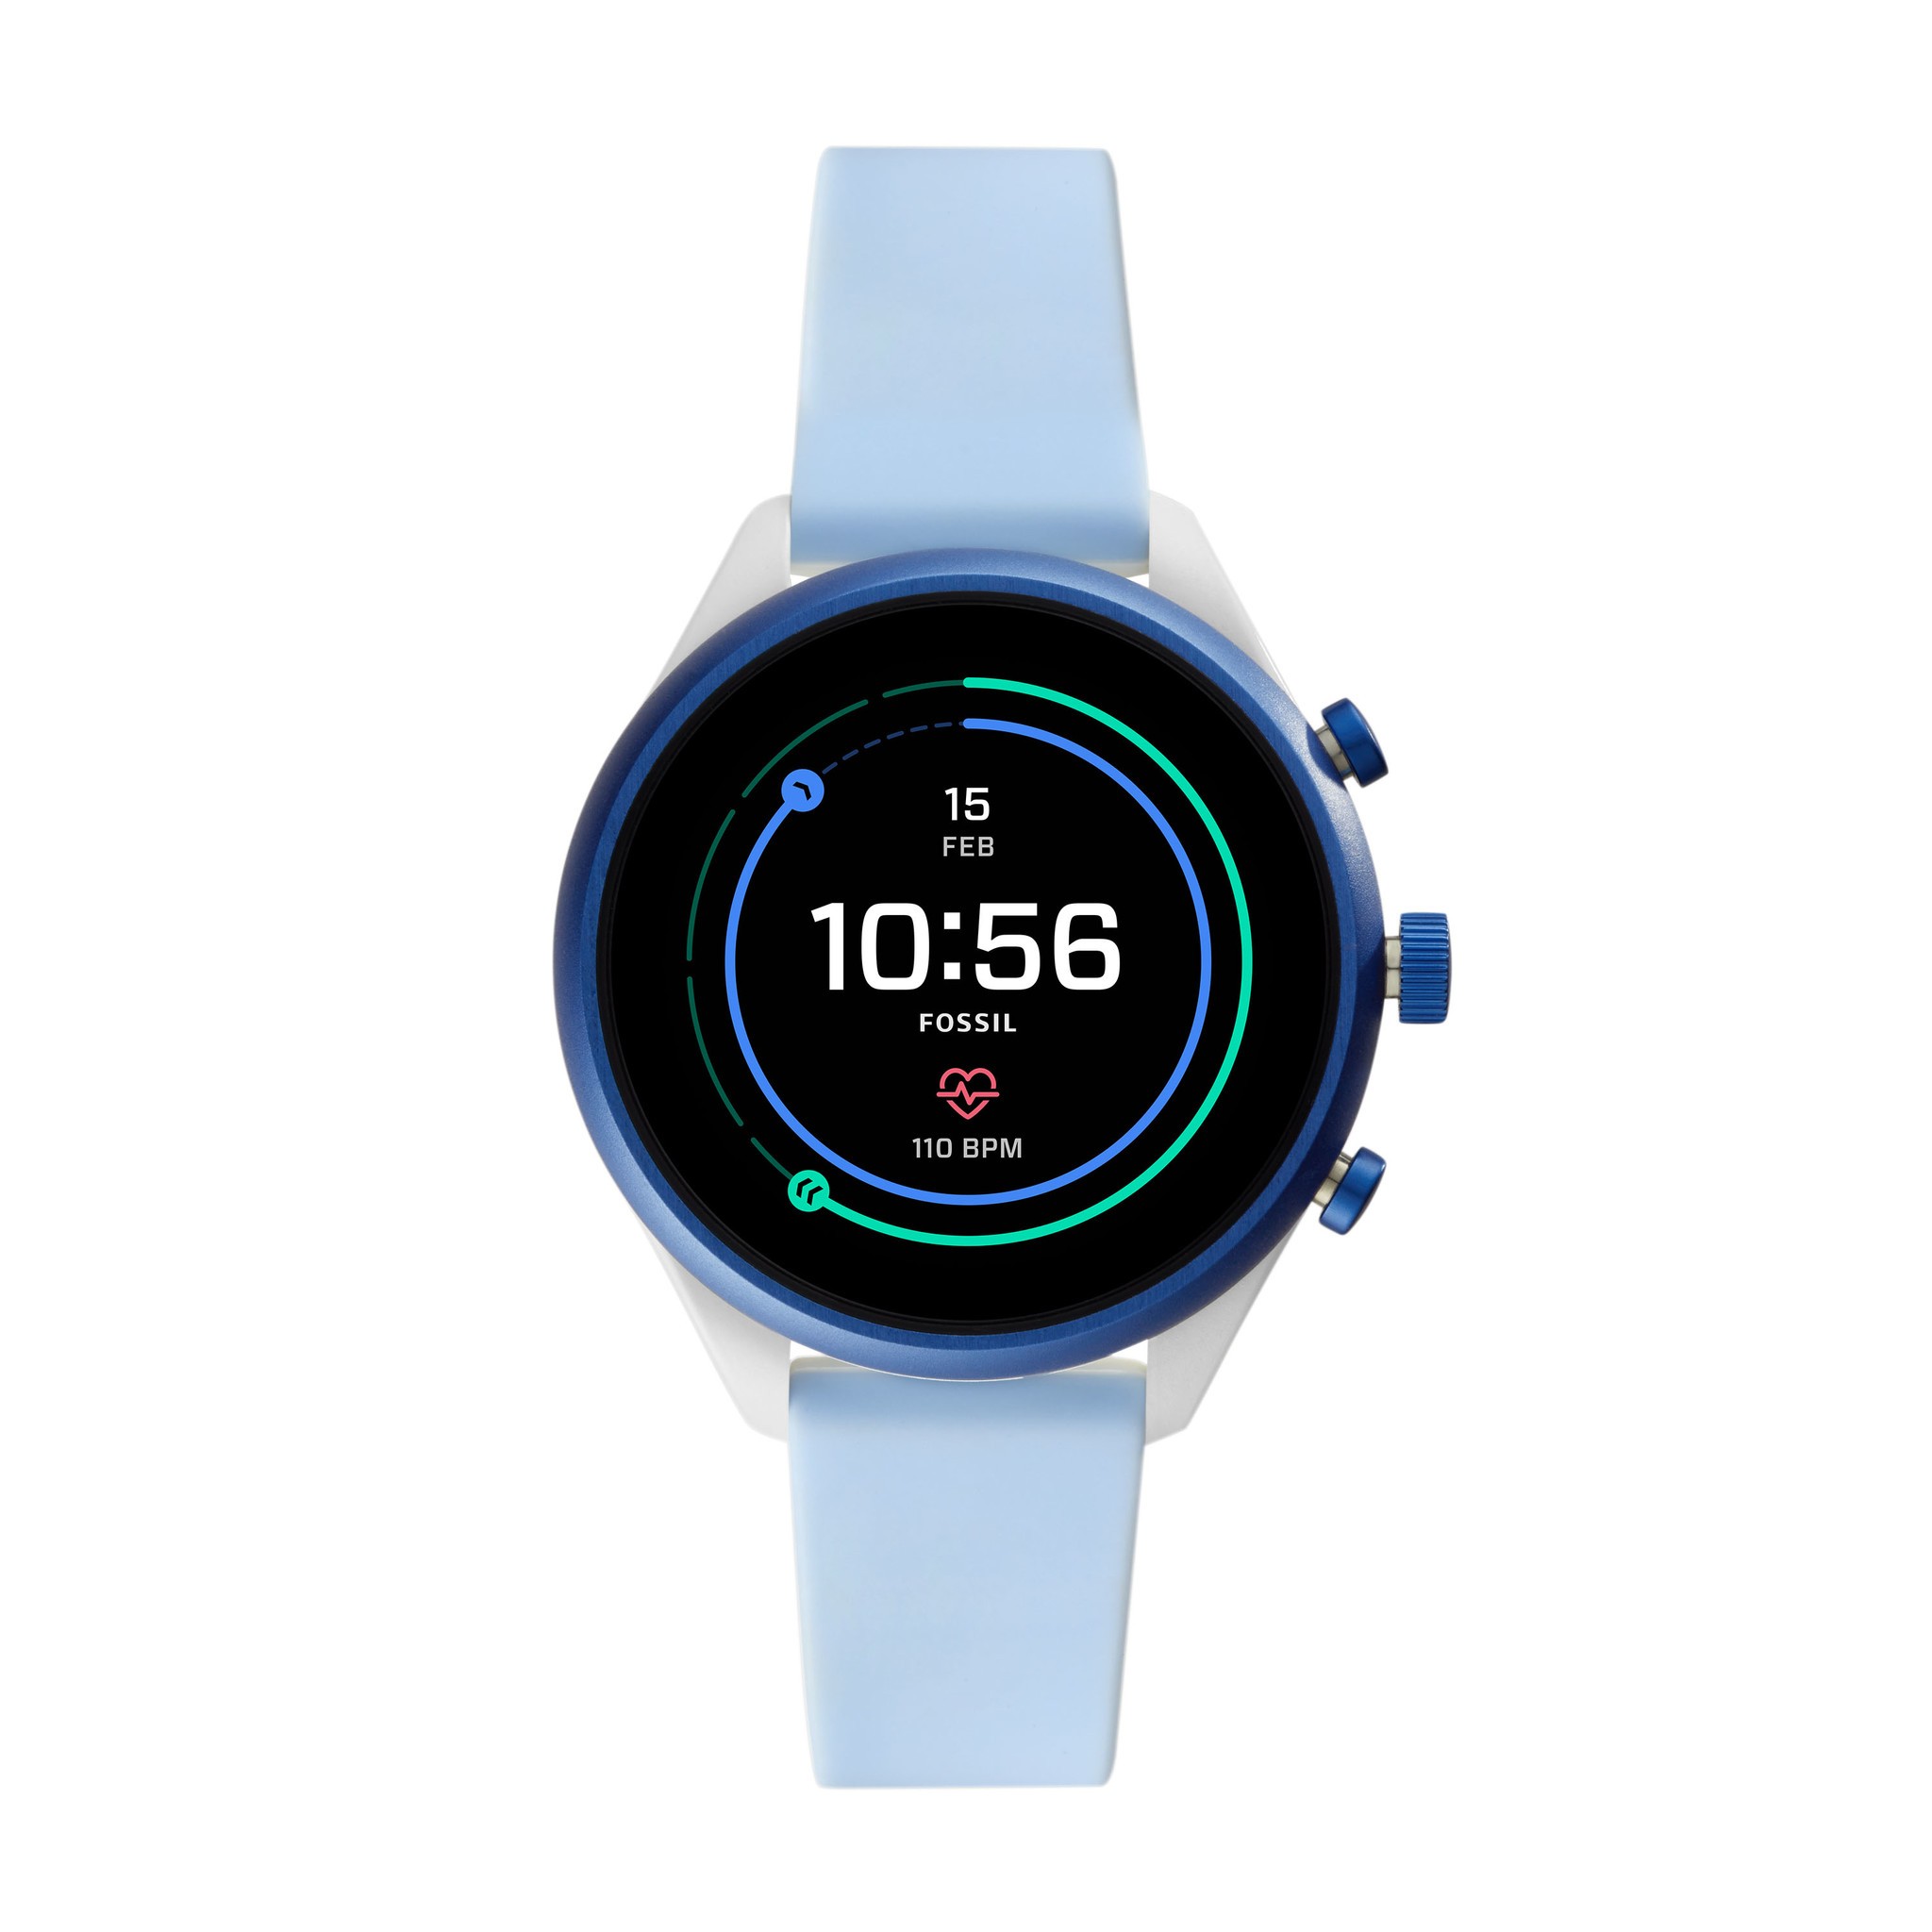 Fossil gets active with Sport smartwatch